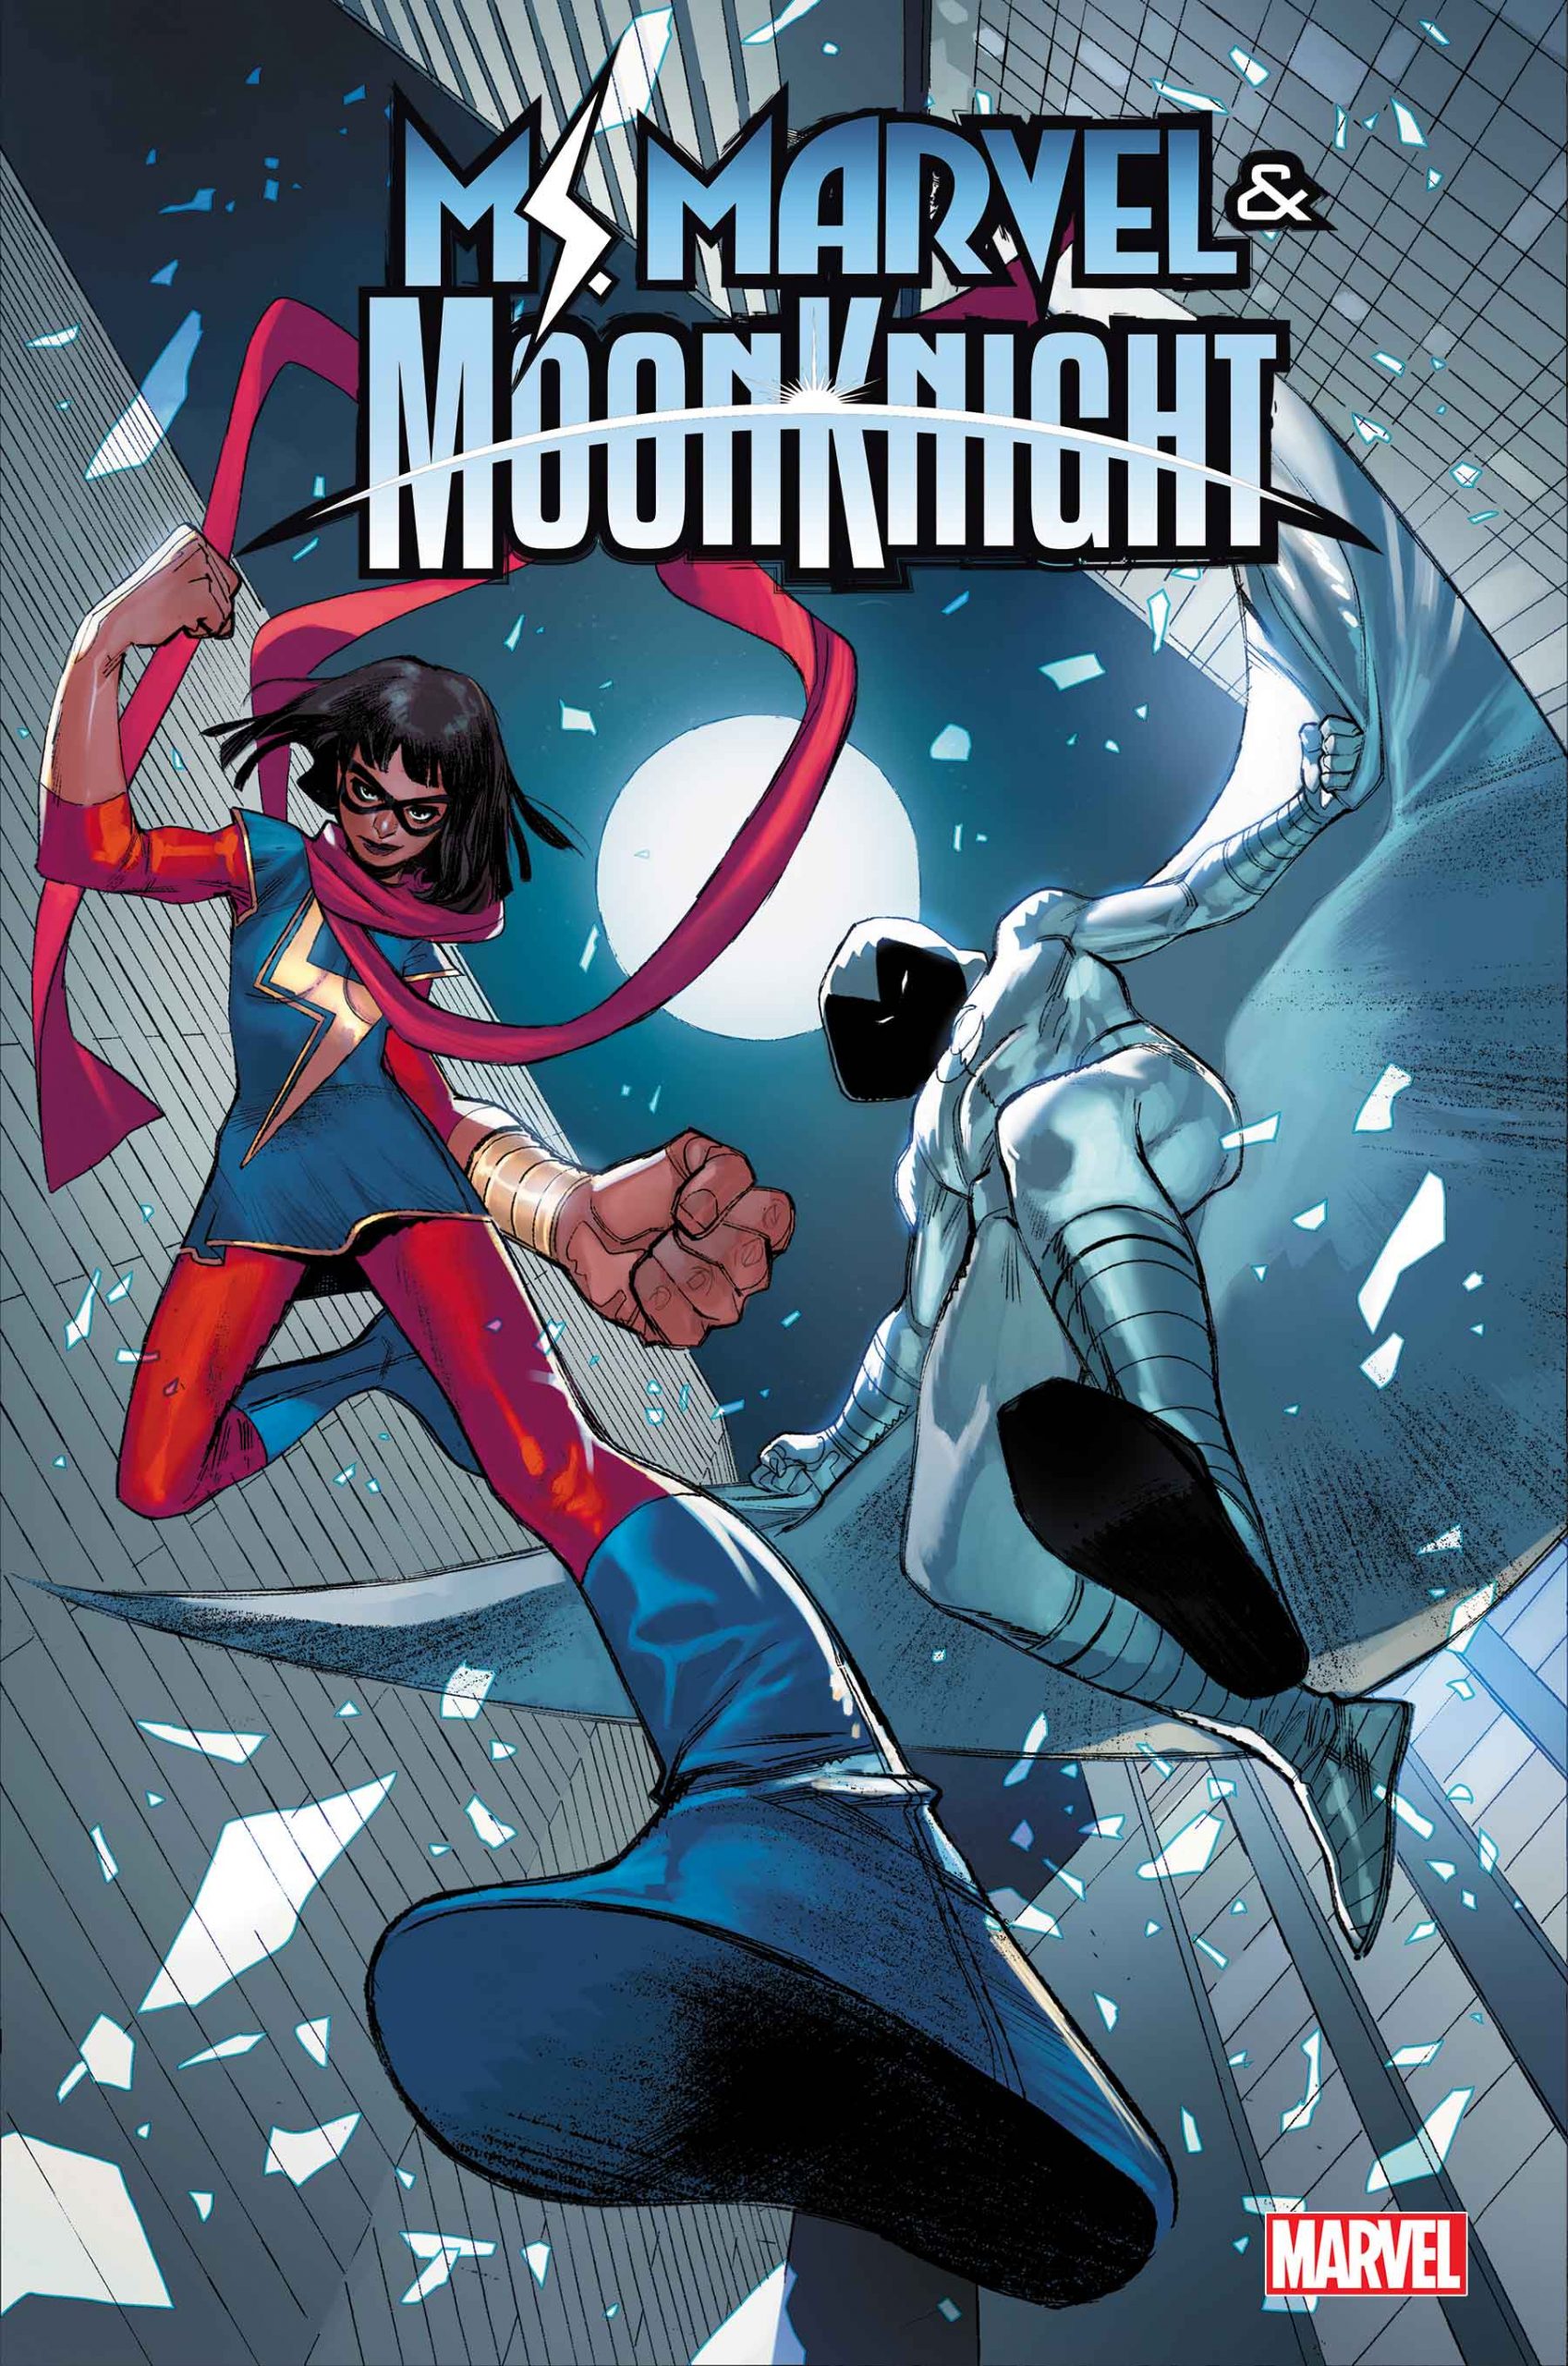 Ms. Marvel teaming up with Venom, Wolverine, and Moon Knight this August